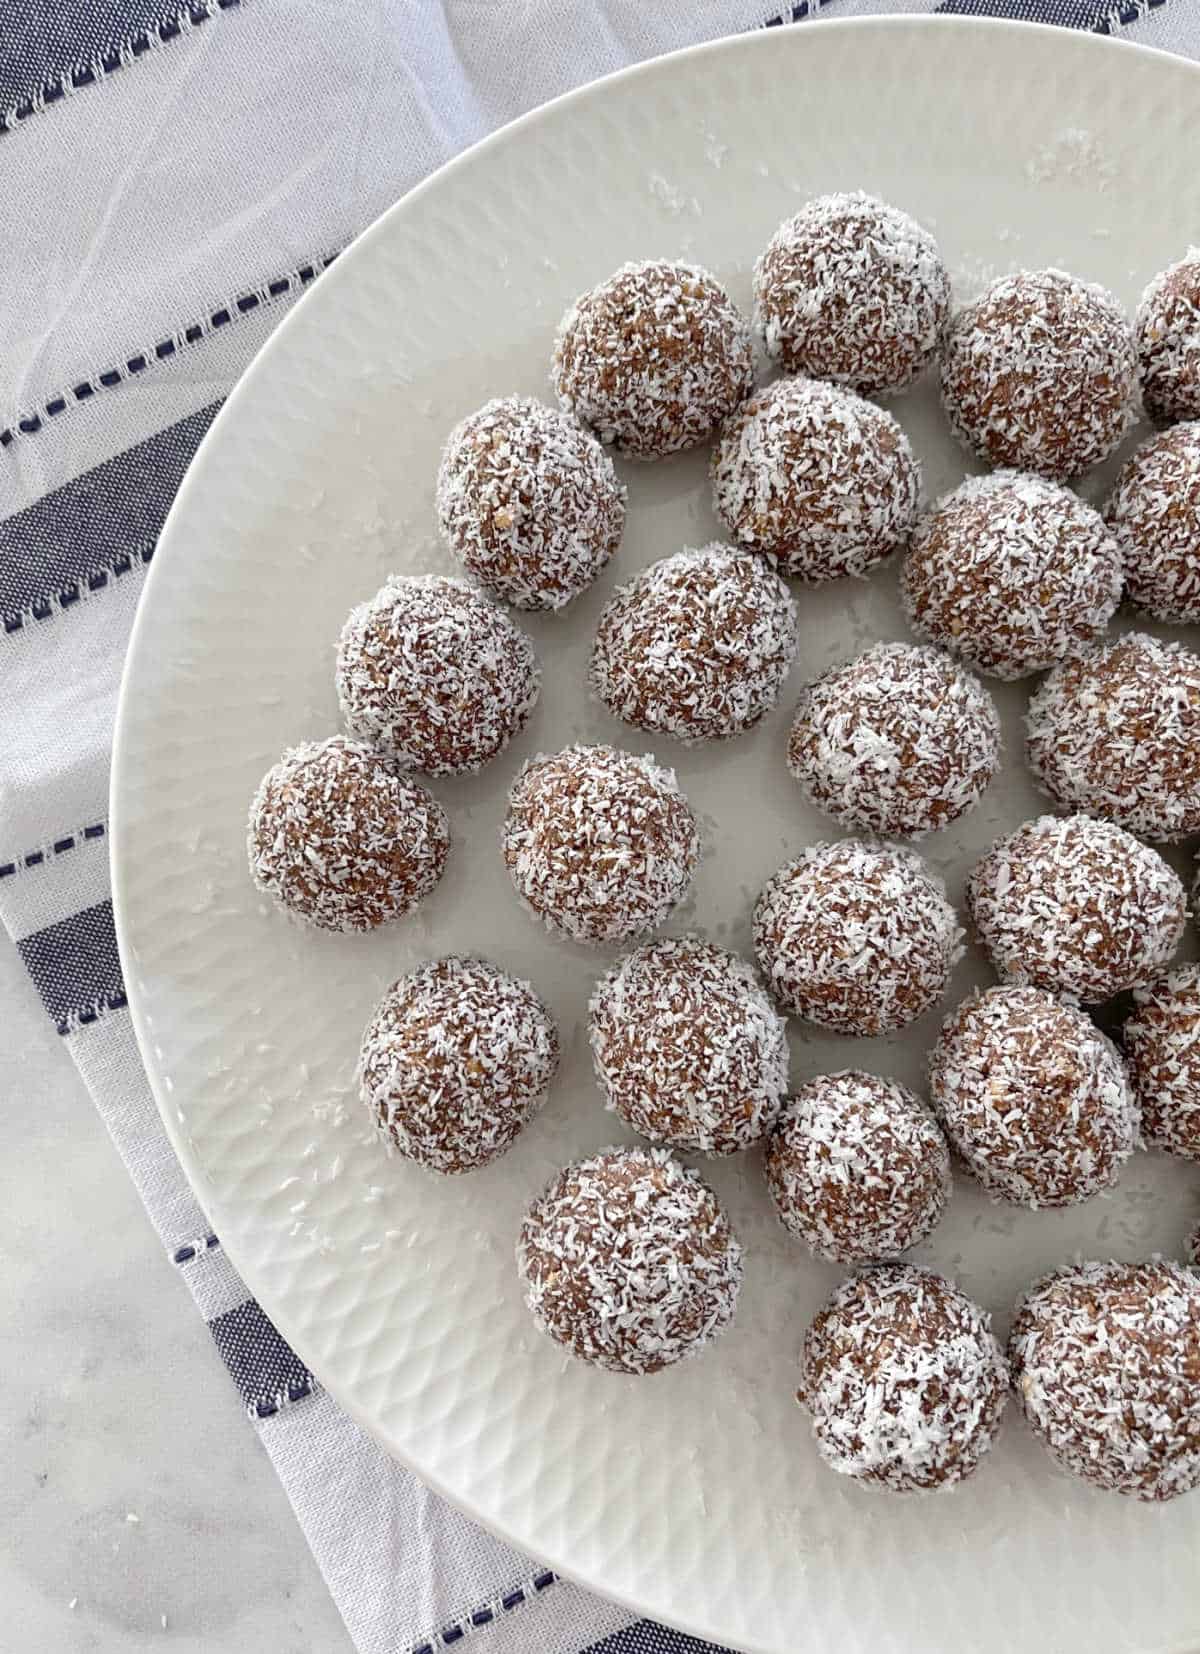 Kid Friendly Rum Balls on a white plate with blue striped towel underneath